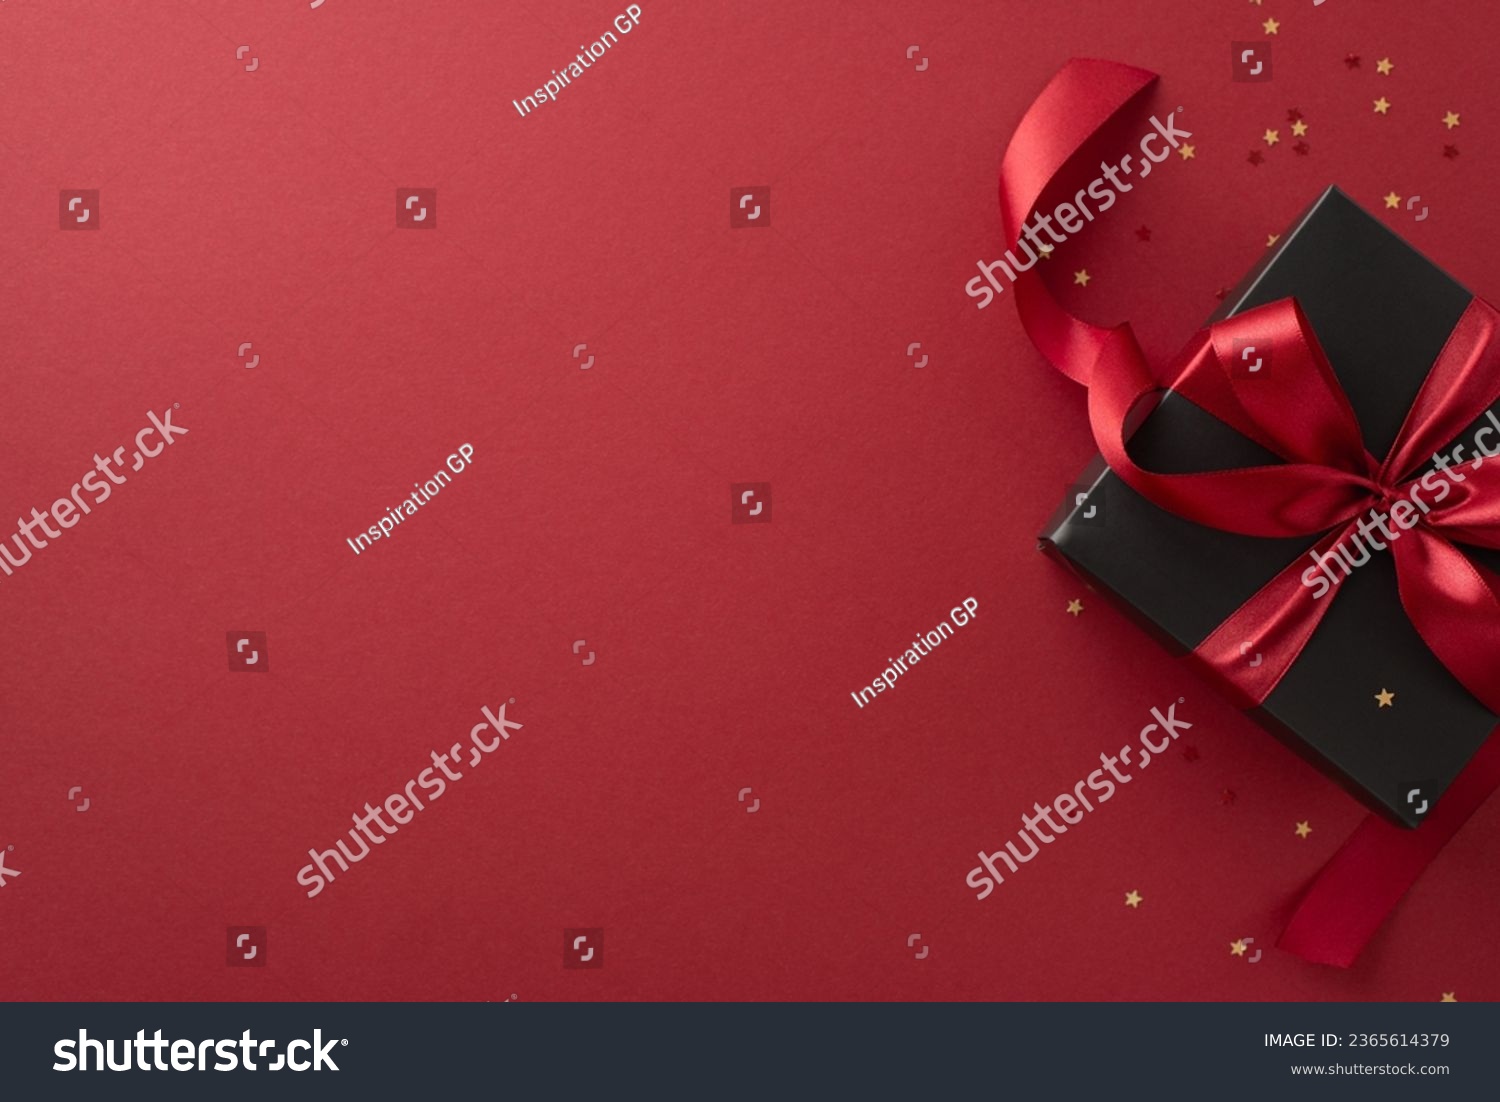 Festive Black Friday surprise! Top view black gift box, adorned with vibrant red ribbon, surrounded by golden star-shaped confetti, set against rich marsala backdrop. Ideal for your Black Friday deals #2365614379